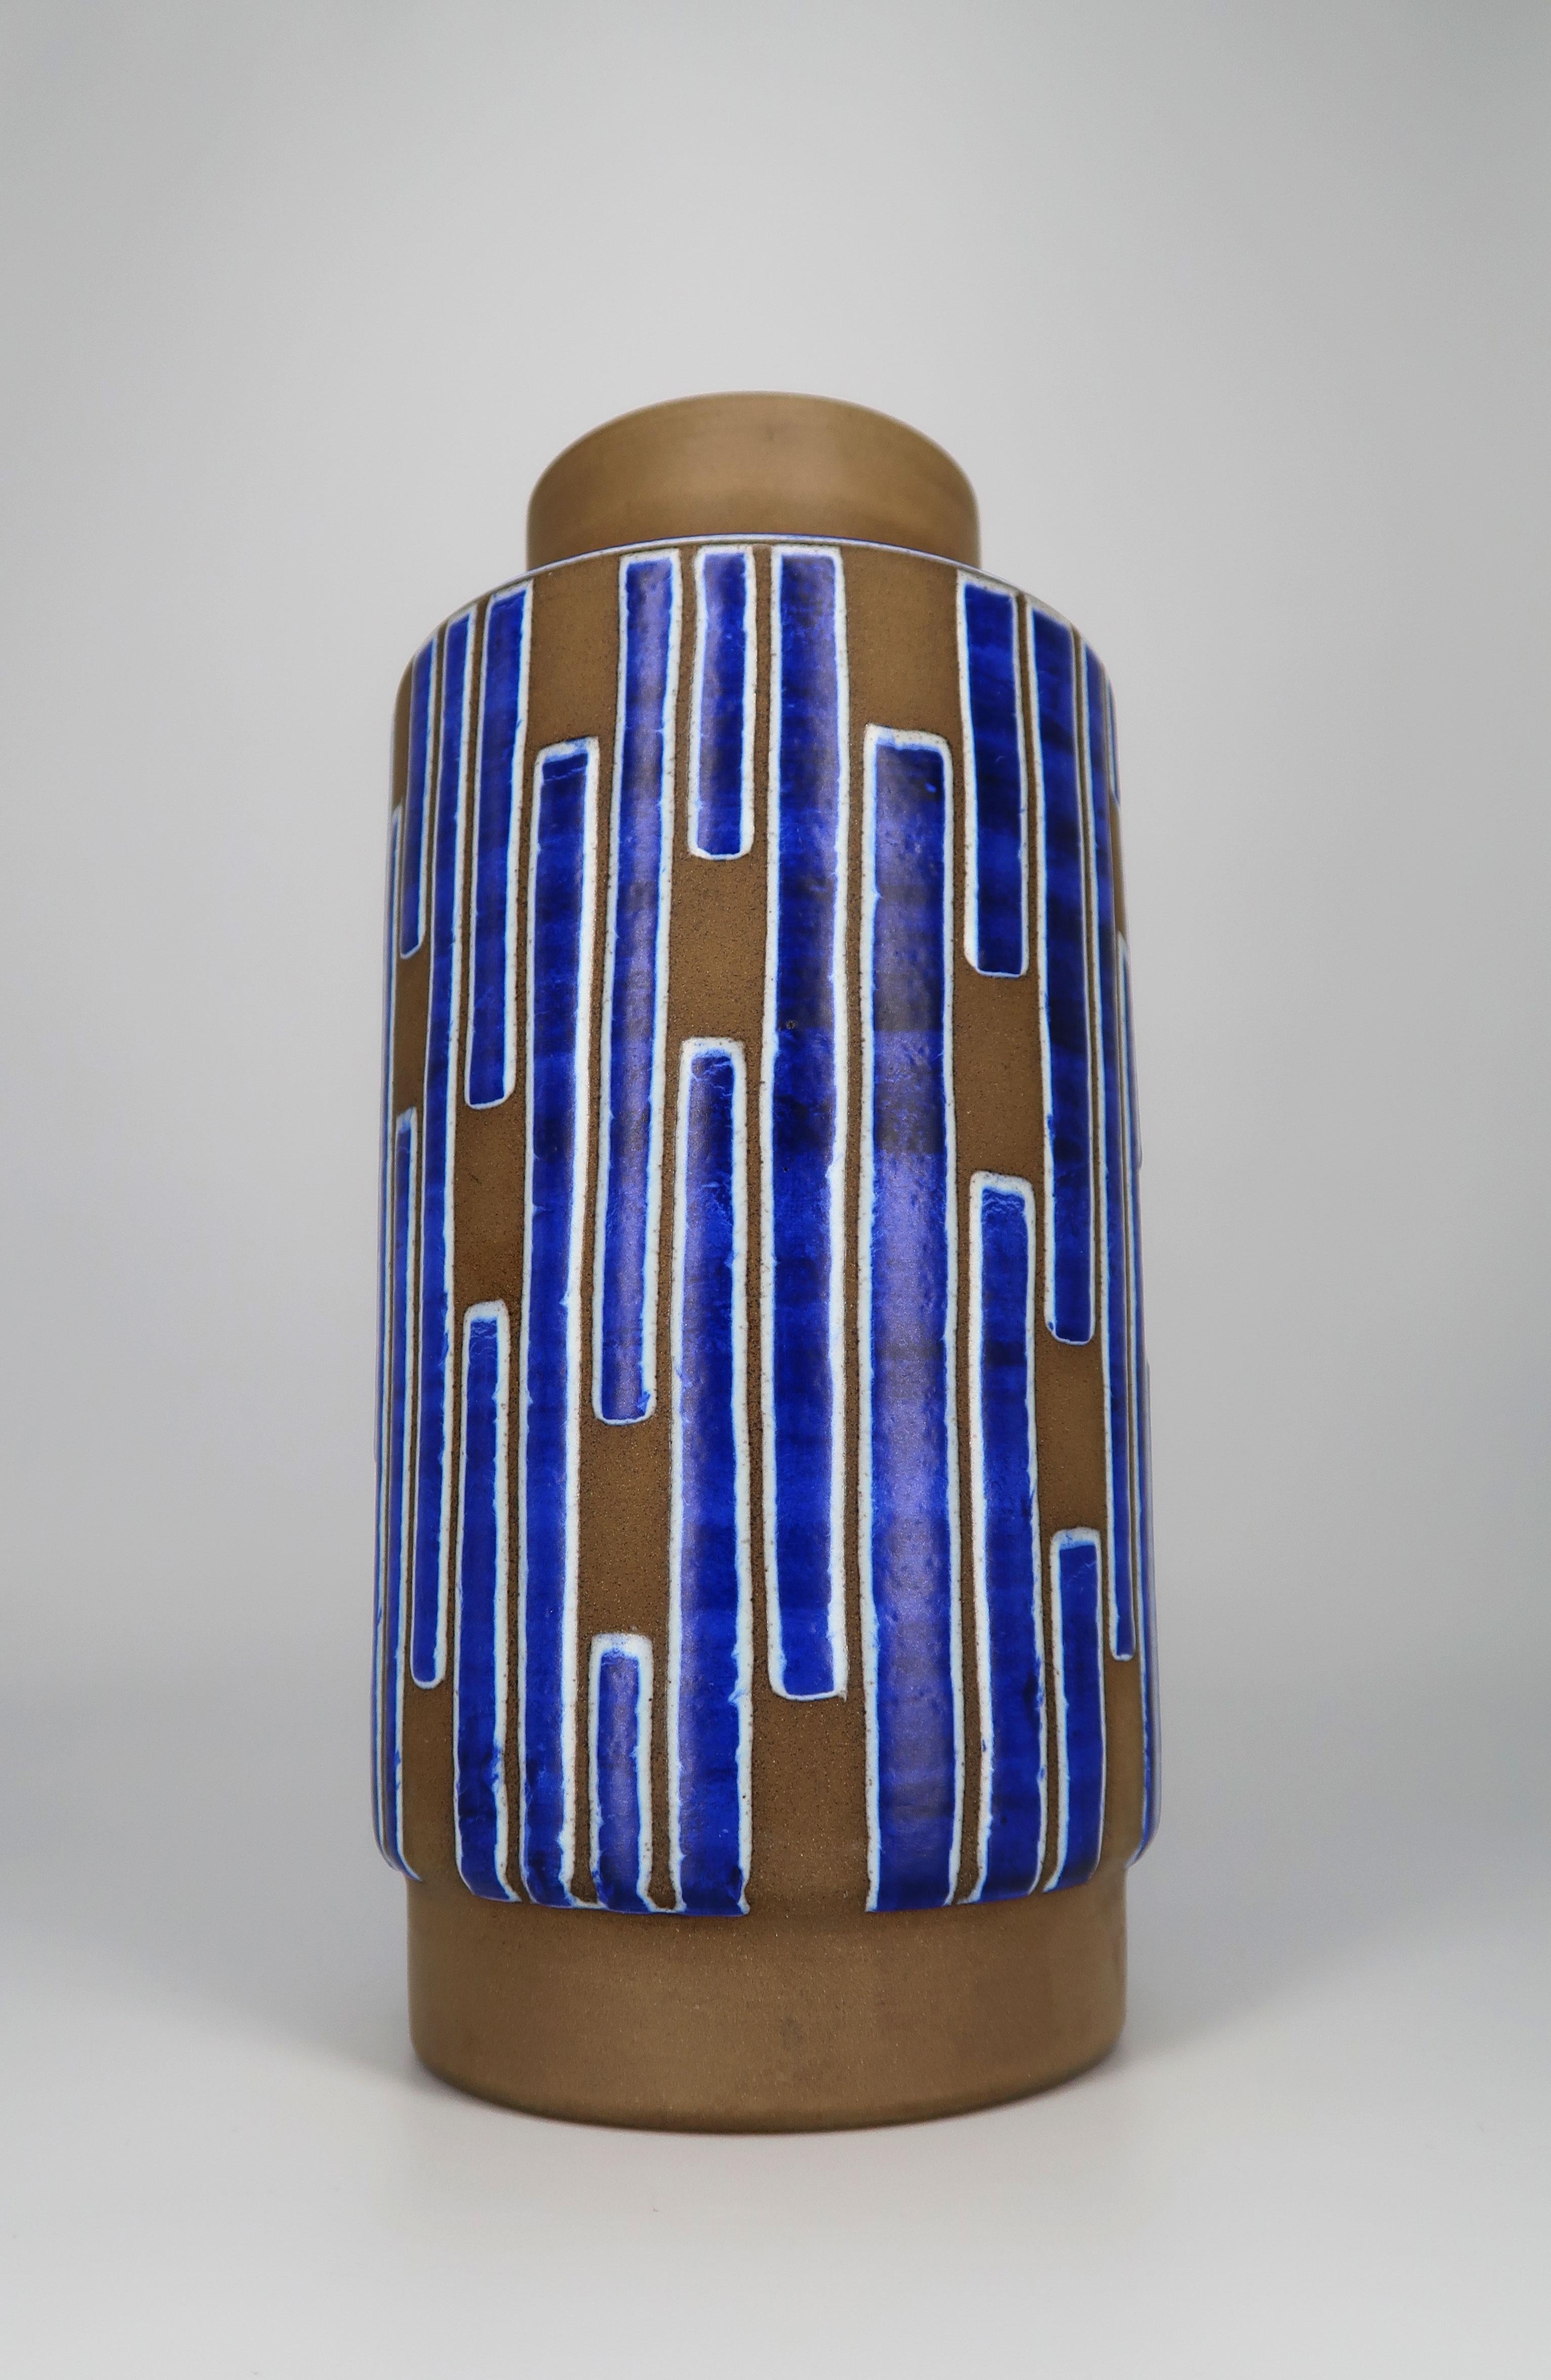 Graphically stunning hand decorated Danish Mid-Century Modern lustrous cobalt blue, chalk white and raw ceramic vase from the 1960s. Manufactured in northern Zealand by Schollert Keramik. Thick bright cobalt blue asymmetrical stripes with white